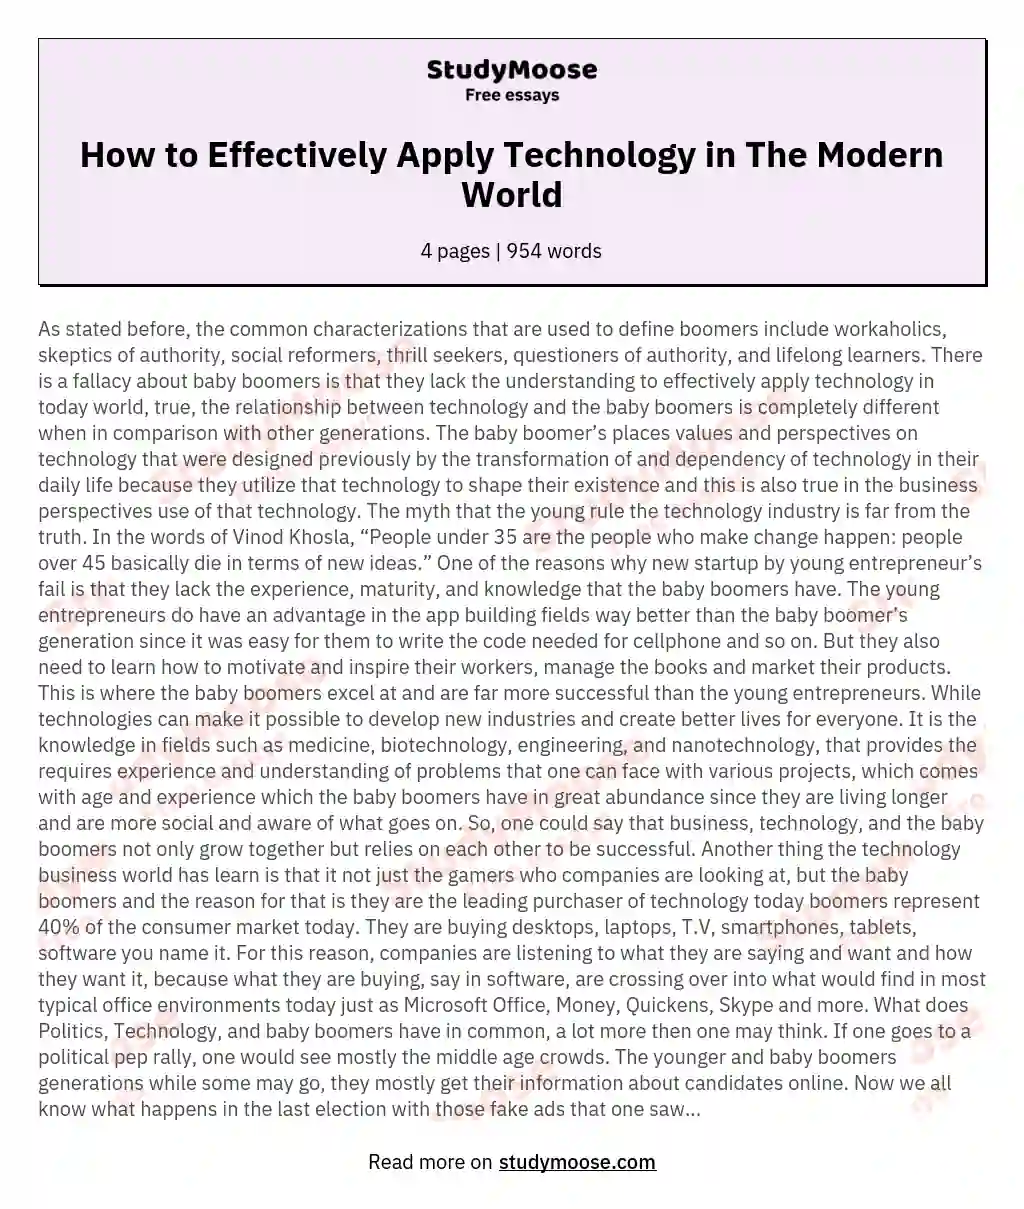 How to Effectively Apply Technology in The Modern World essay